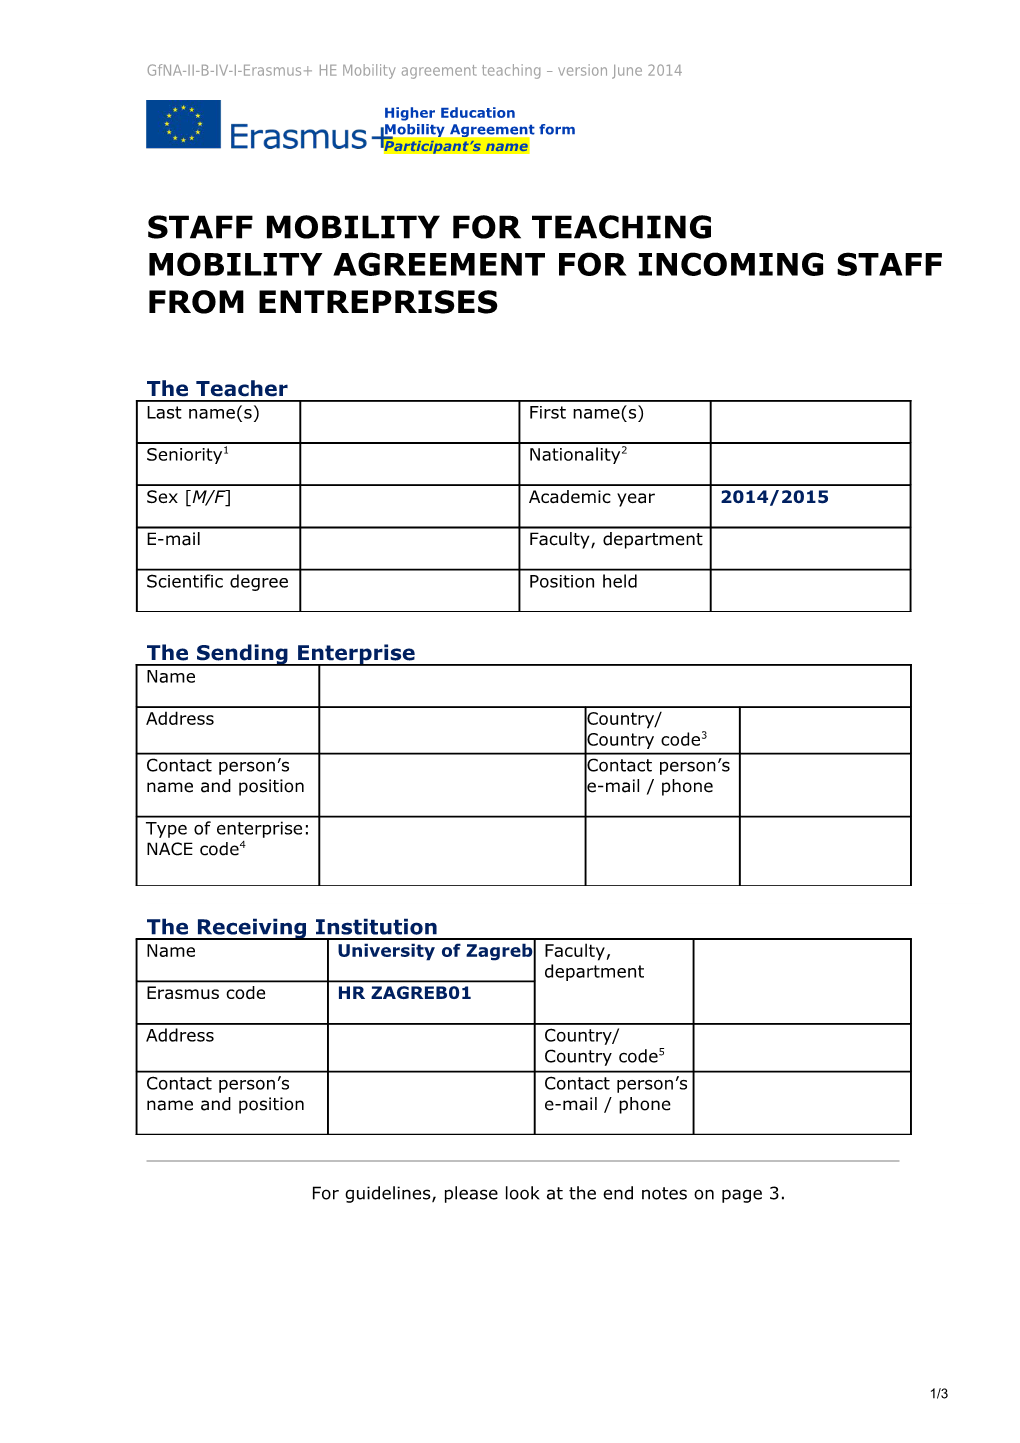 Mobility Agreement for Incoming Staff from Entreprises